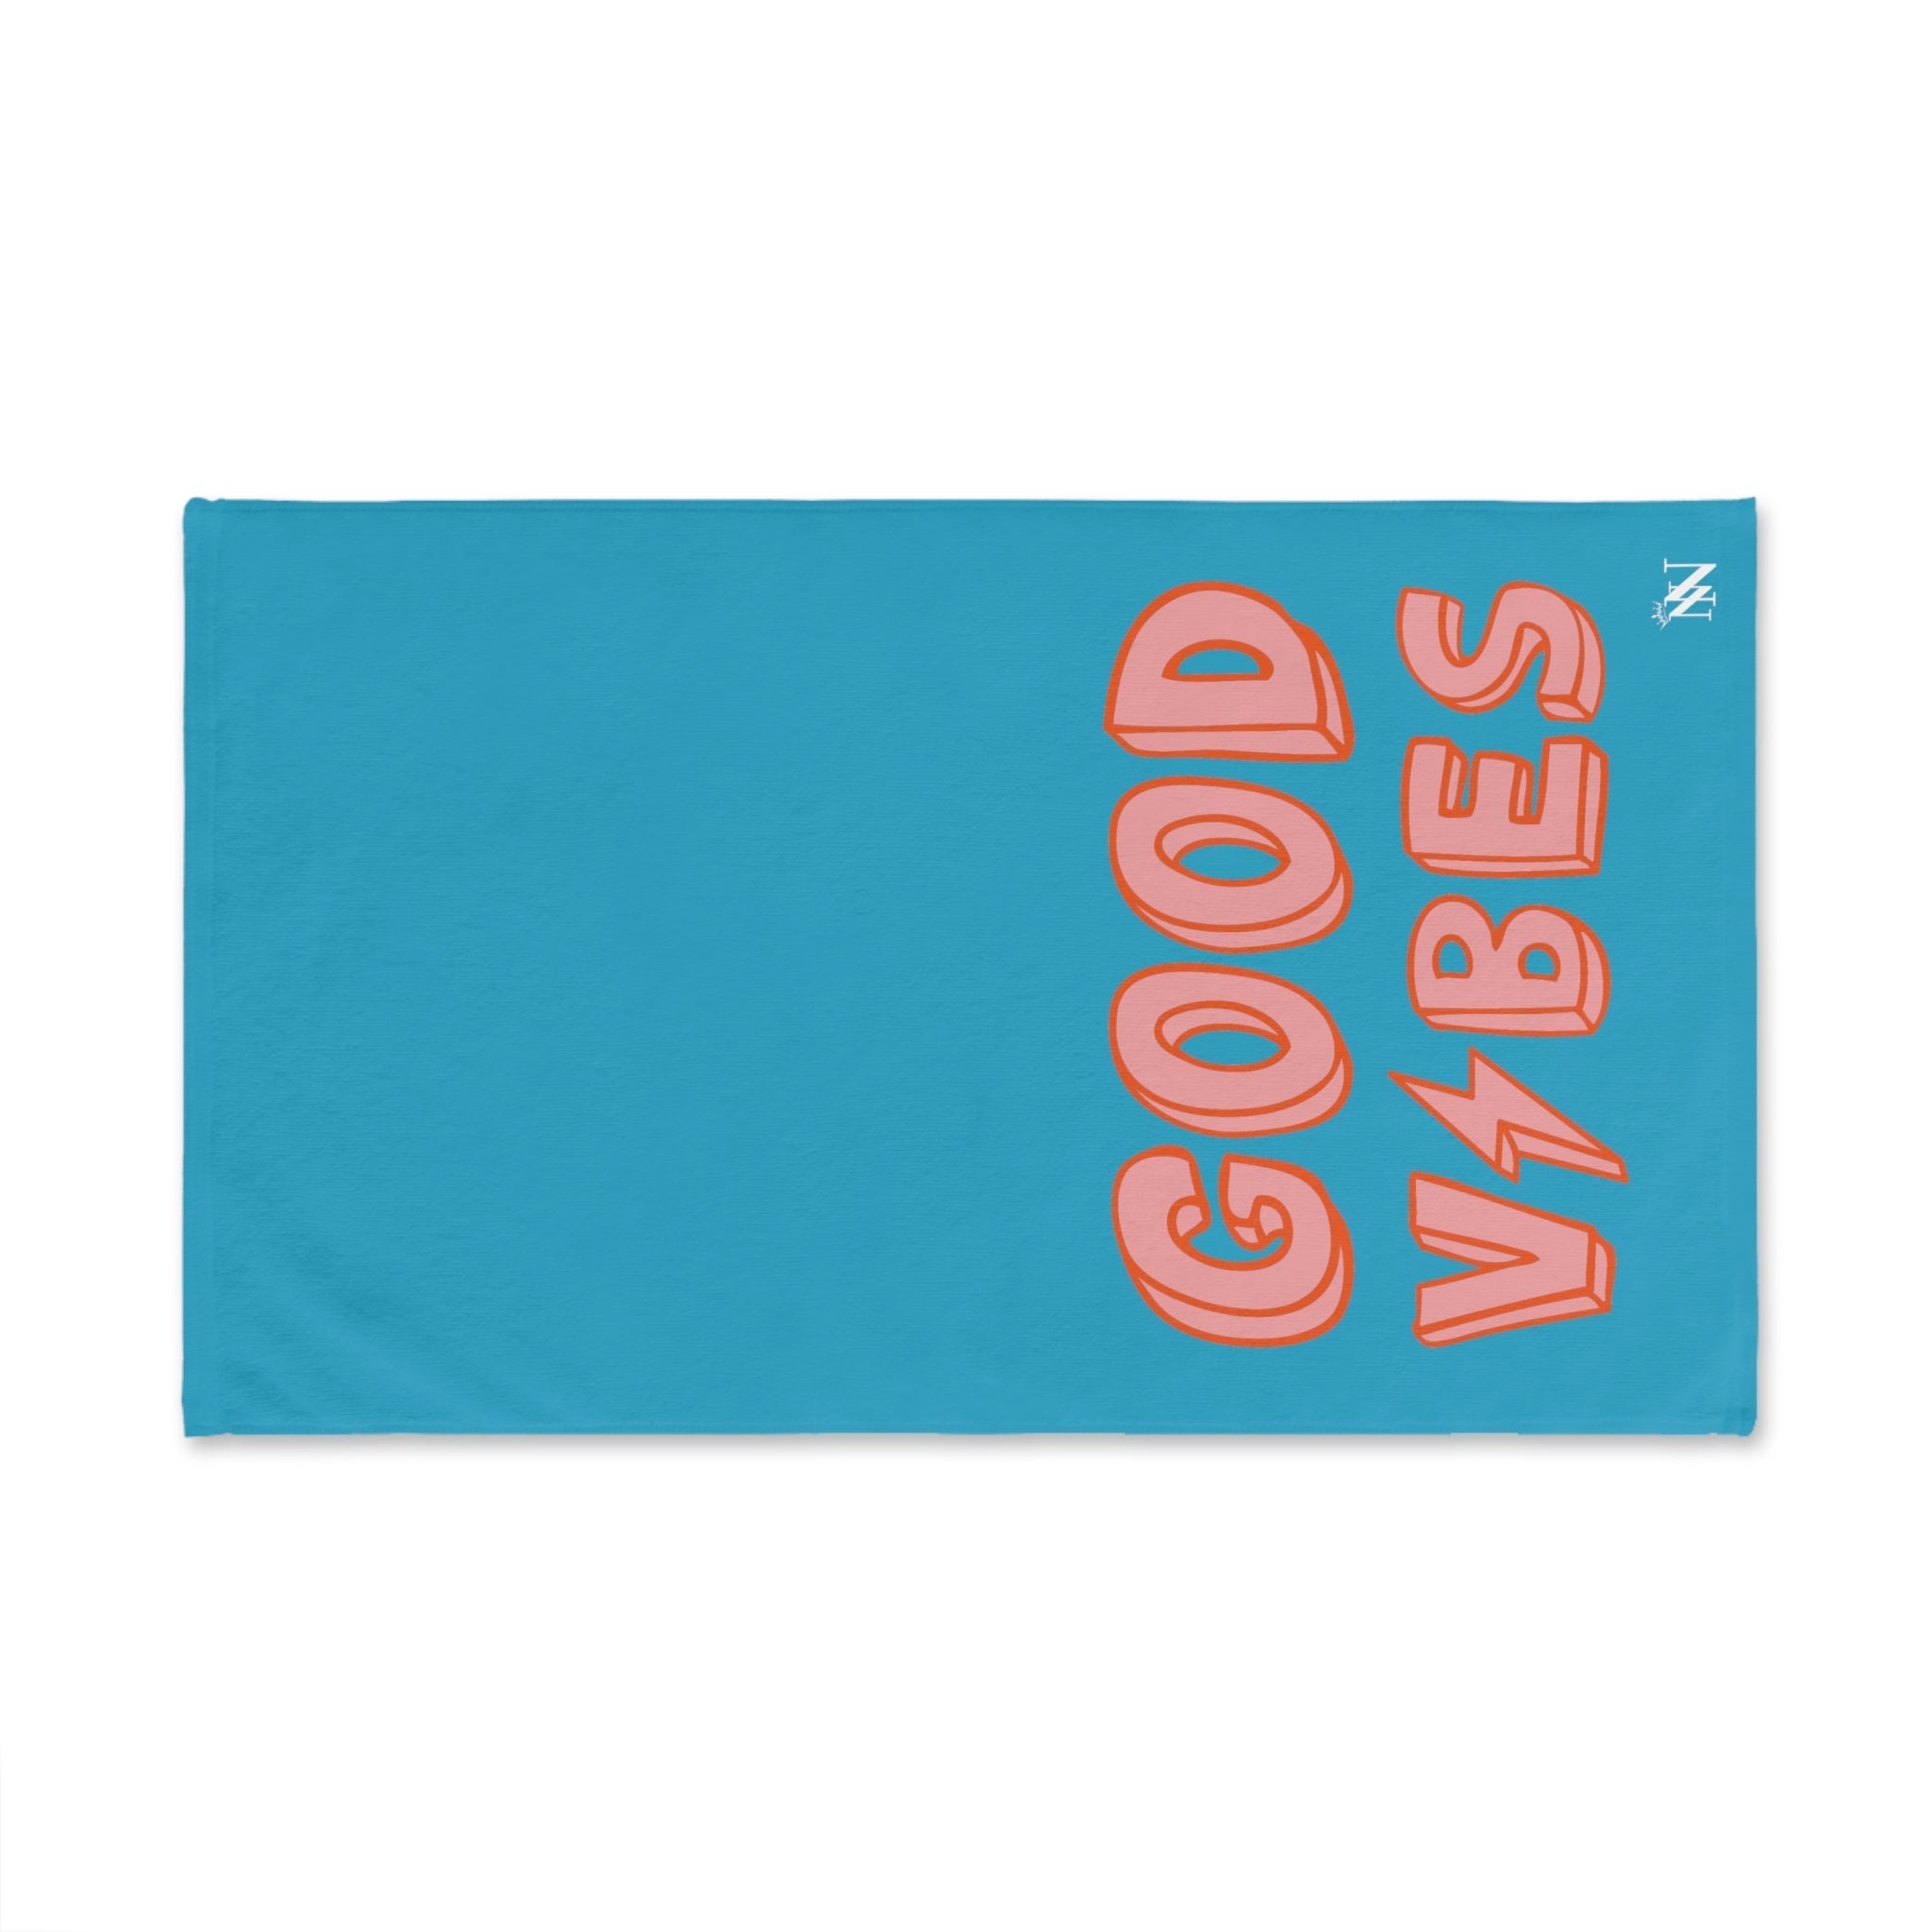 Electric Vibe Good Teal | Novelty Gifts for Boyfriend, Funny Towel Romantic Gift for Wedding Couple Fiance First Year Anniversary Valentines, Party Gag Gifts, Joke Humor Cloth for Husband Men BF NECTAR NAPKINS